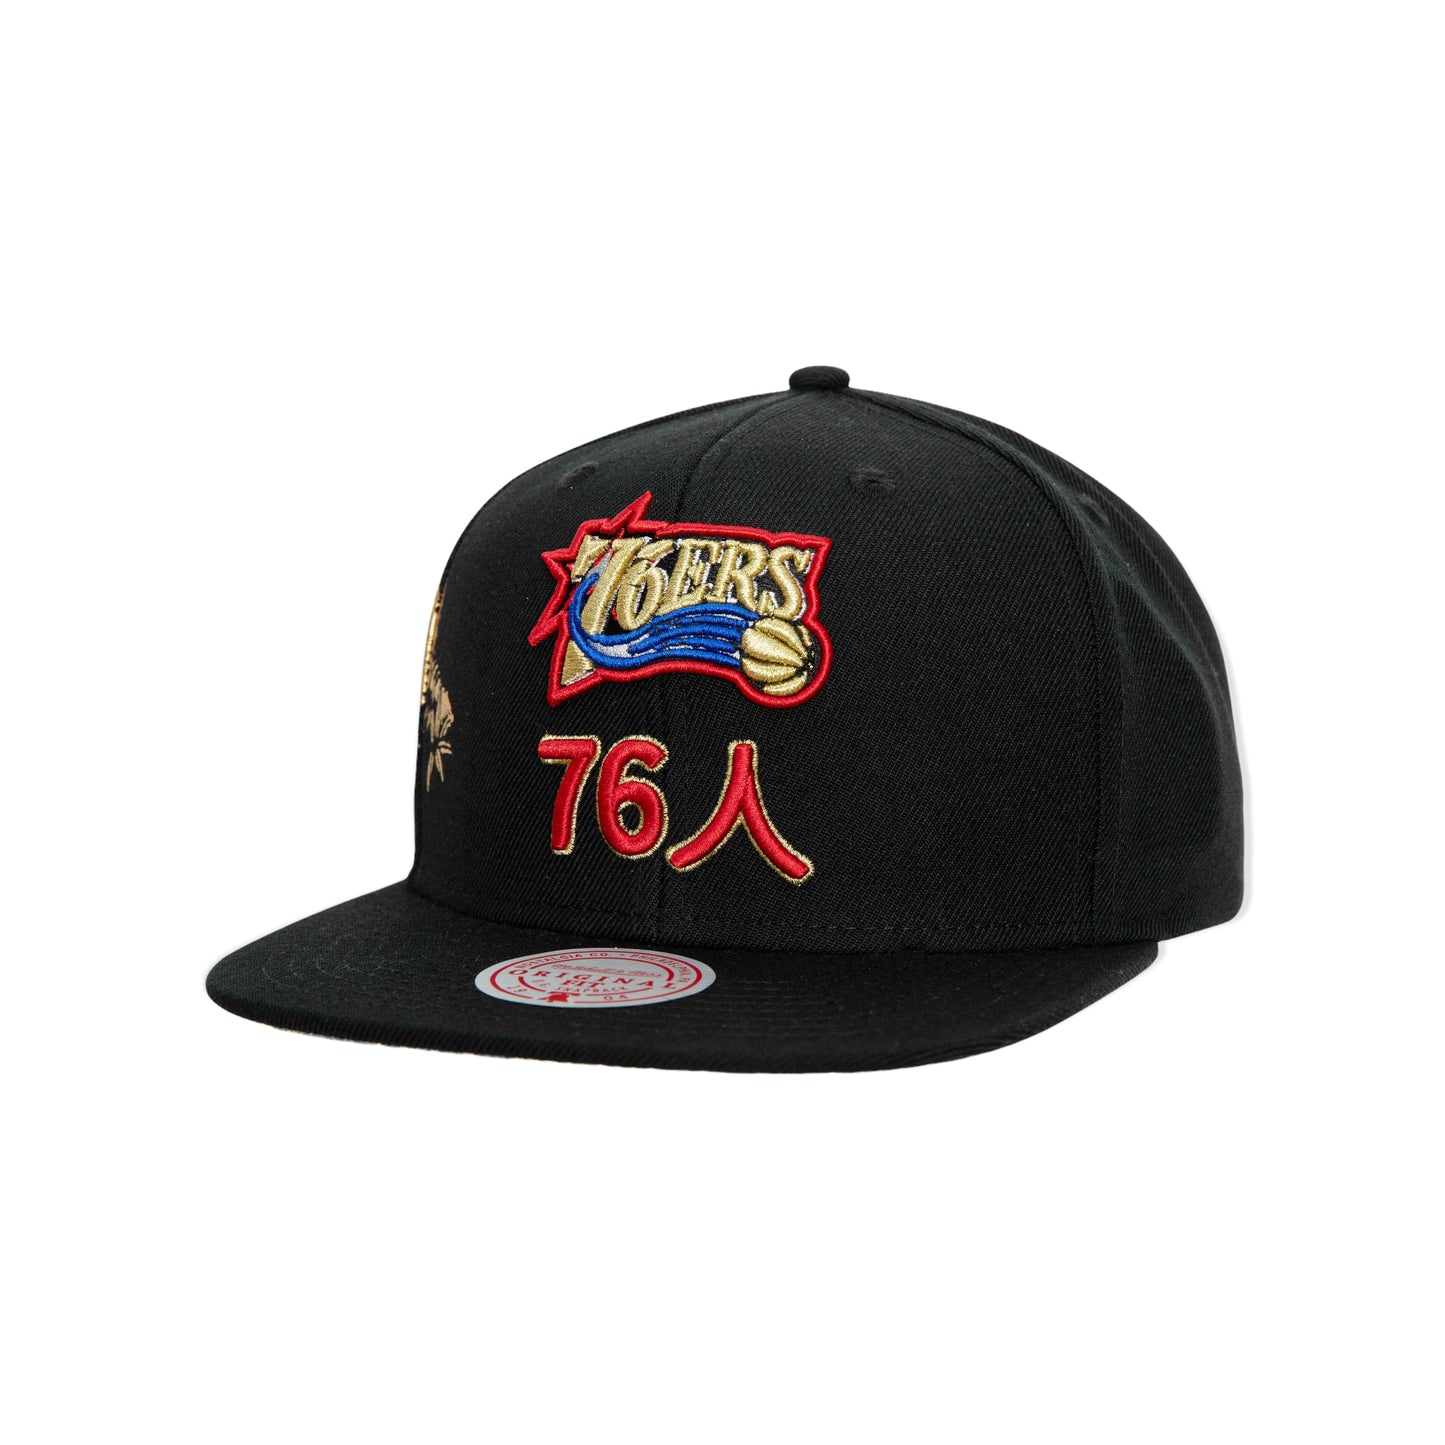 MITCHELL & NESS: 76ERS Water Tiger Snapback